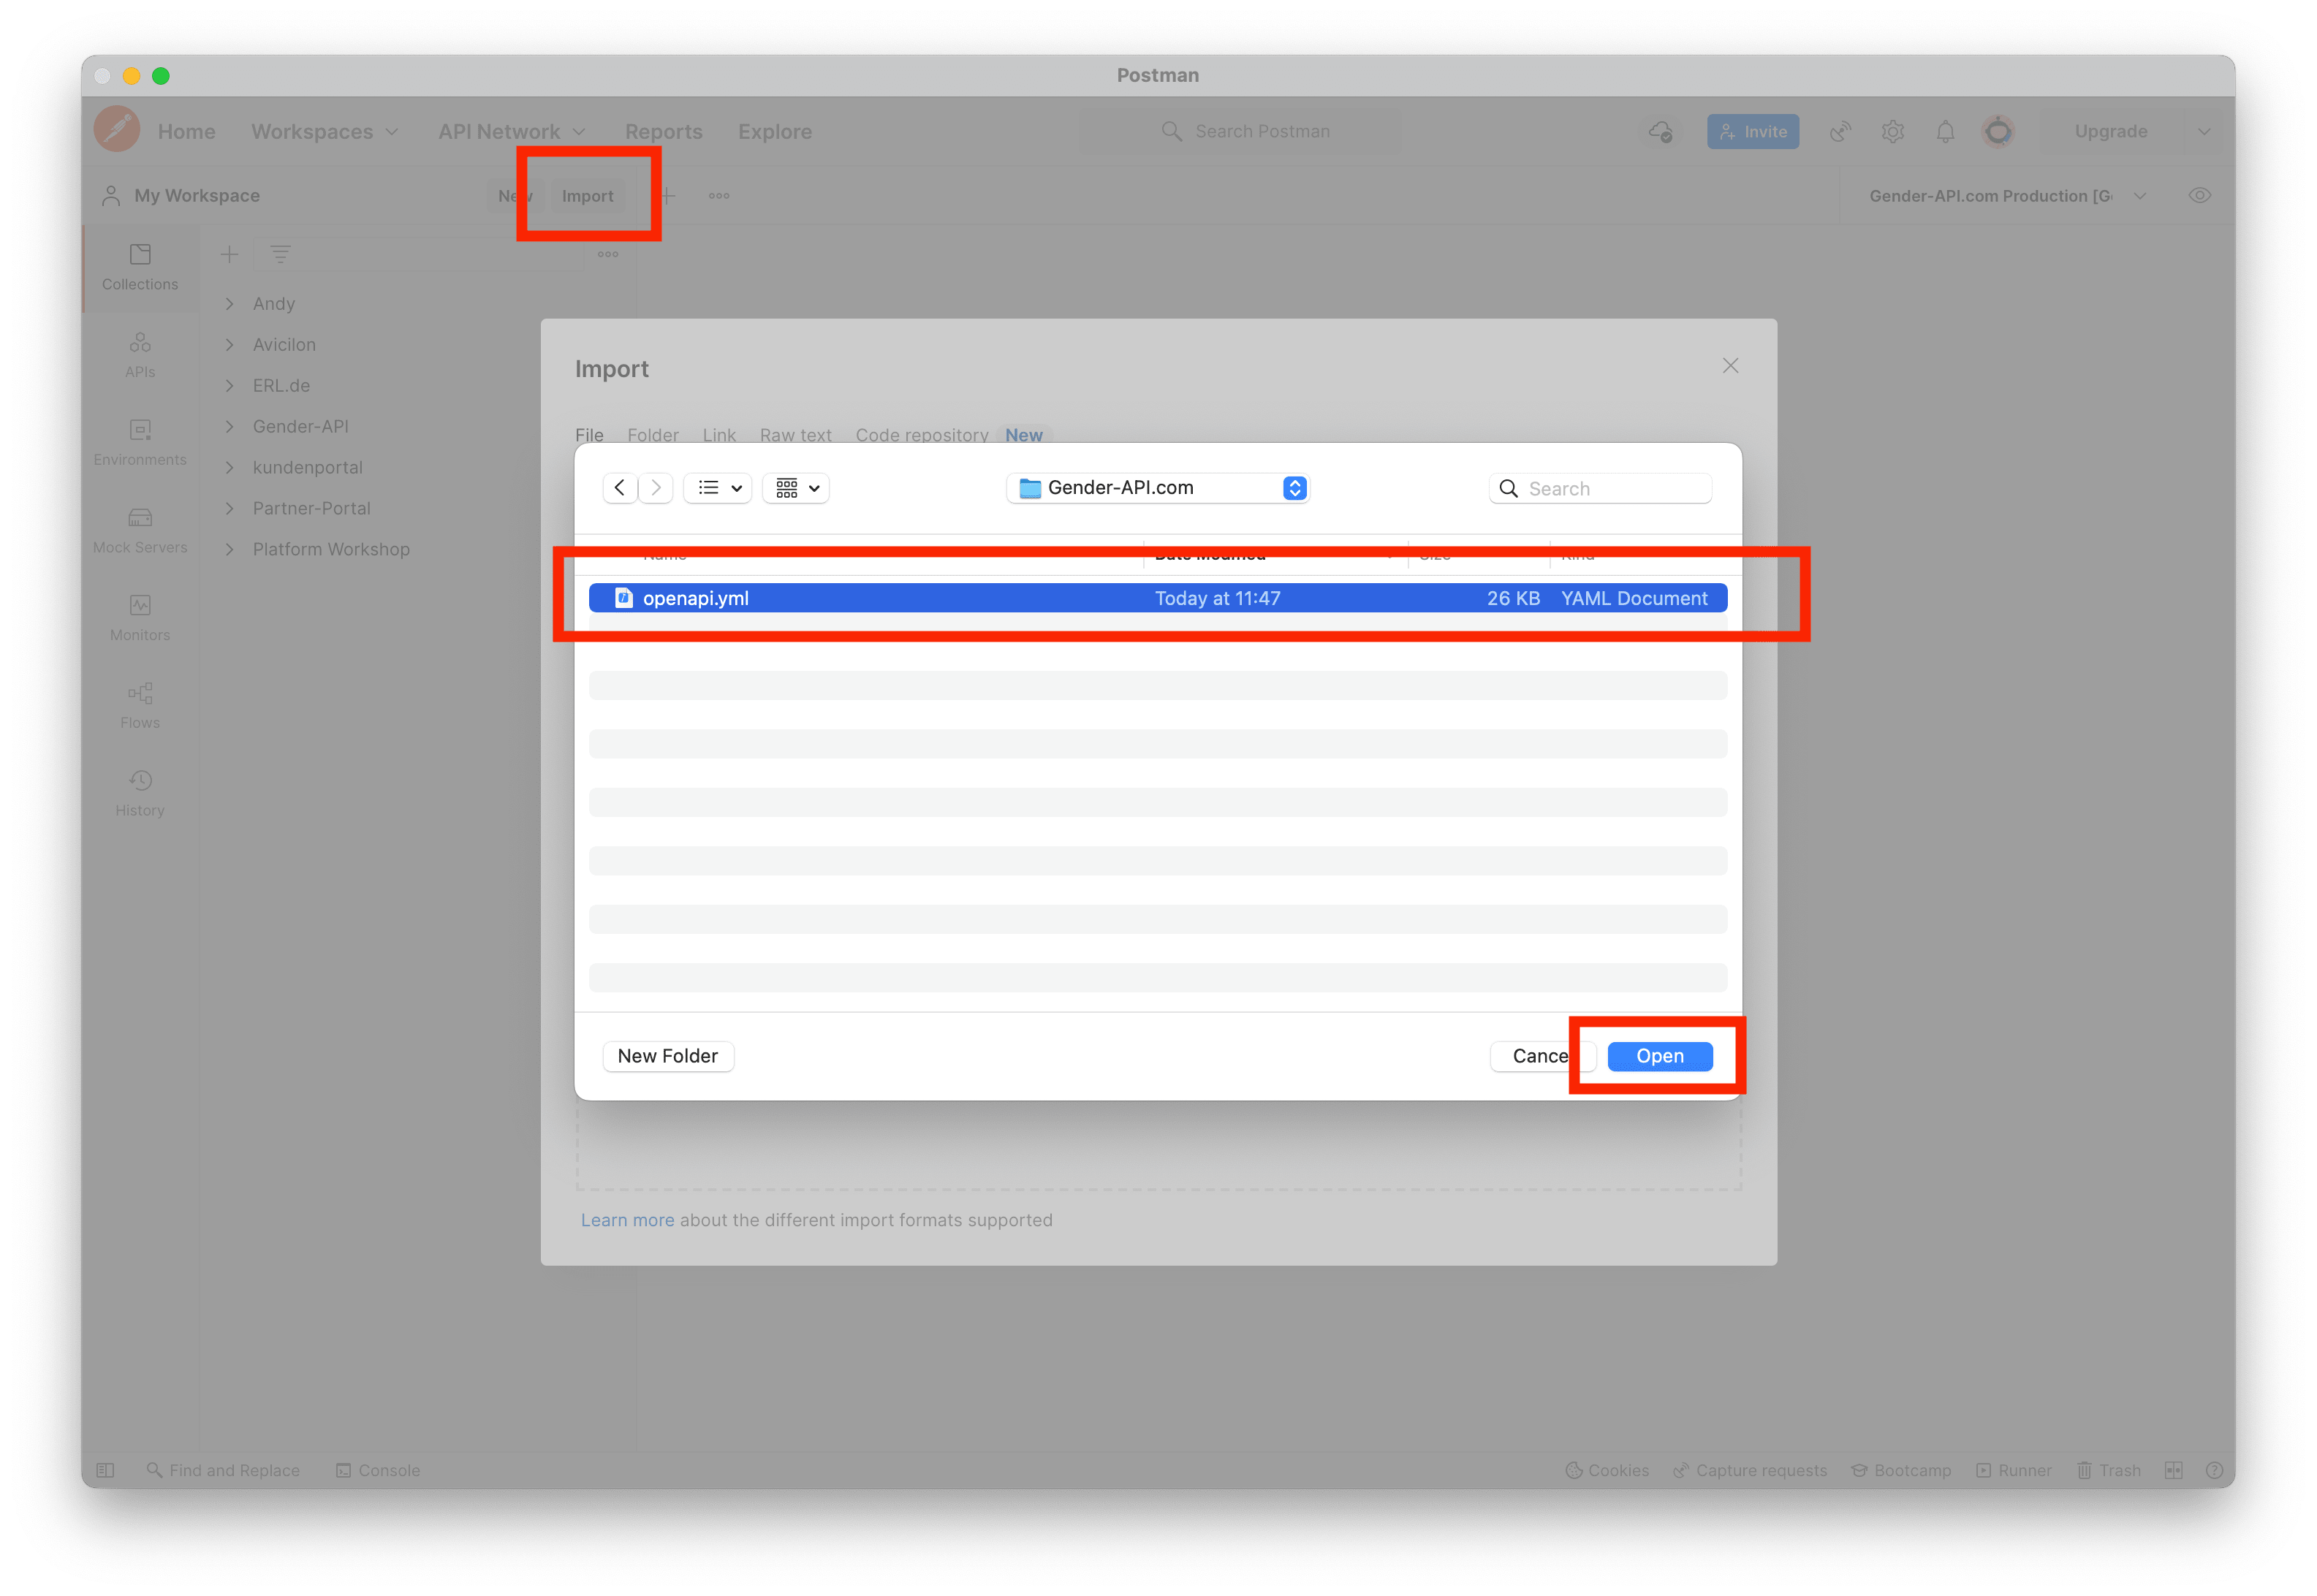 Import the file into Postman